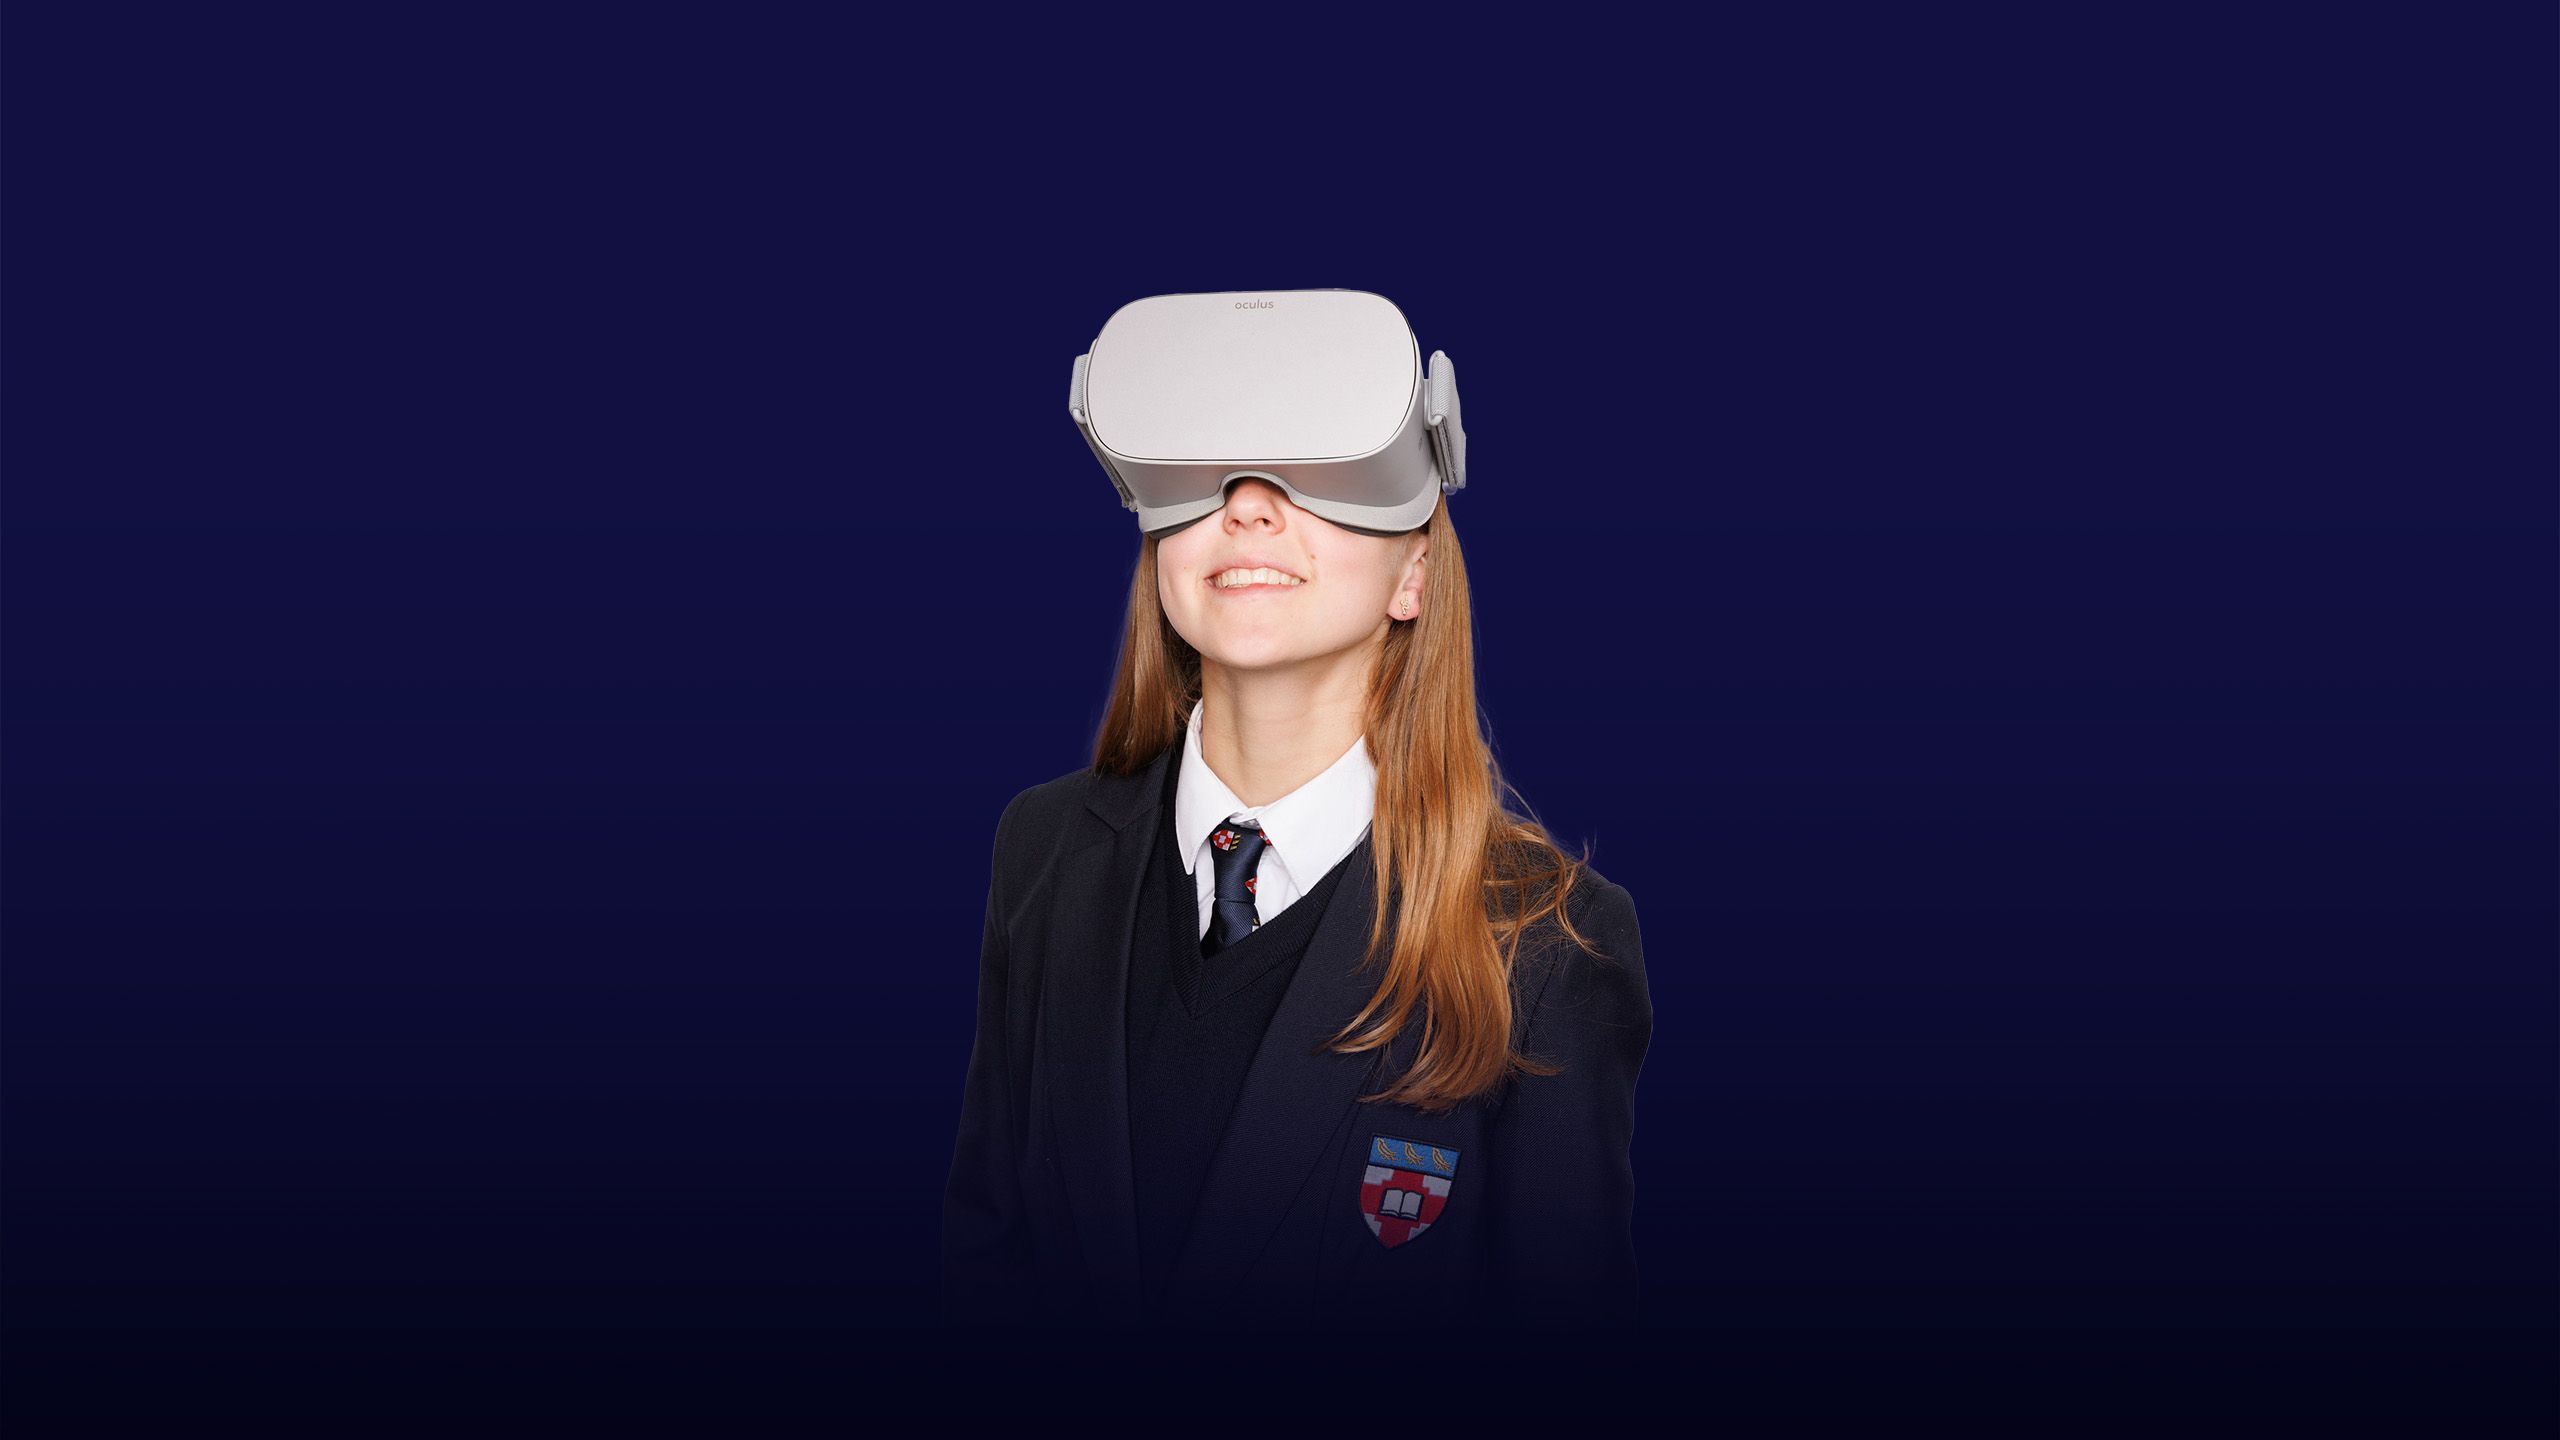 Image of a girl wearing a VR Headset with an overlay of the text "inspiring minds"